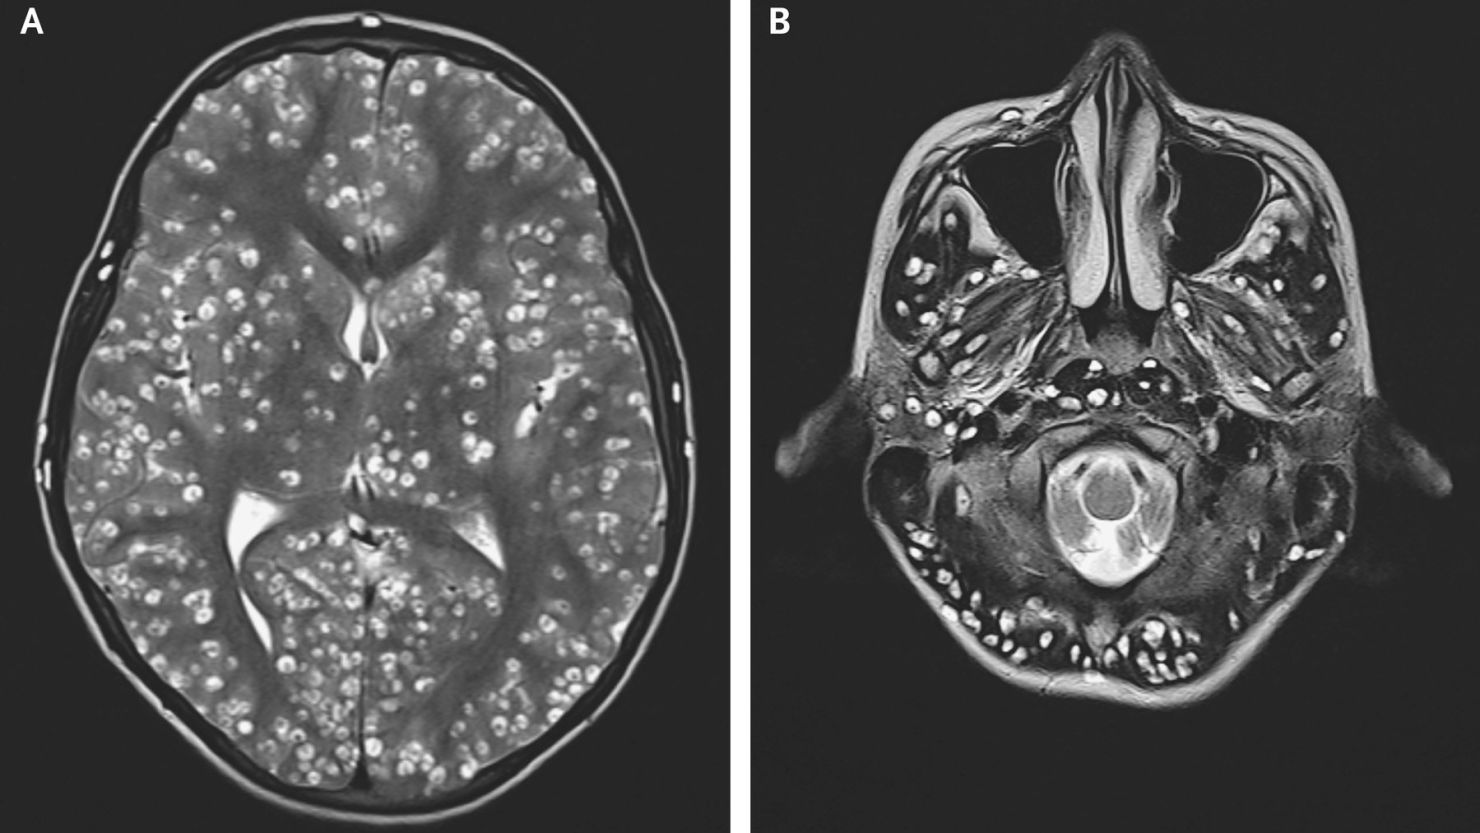 Damage-causing cysts were seen on MRI scans of the patient's cerebral cortex and brain stem.